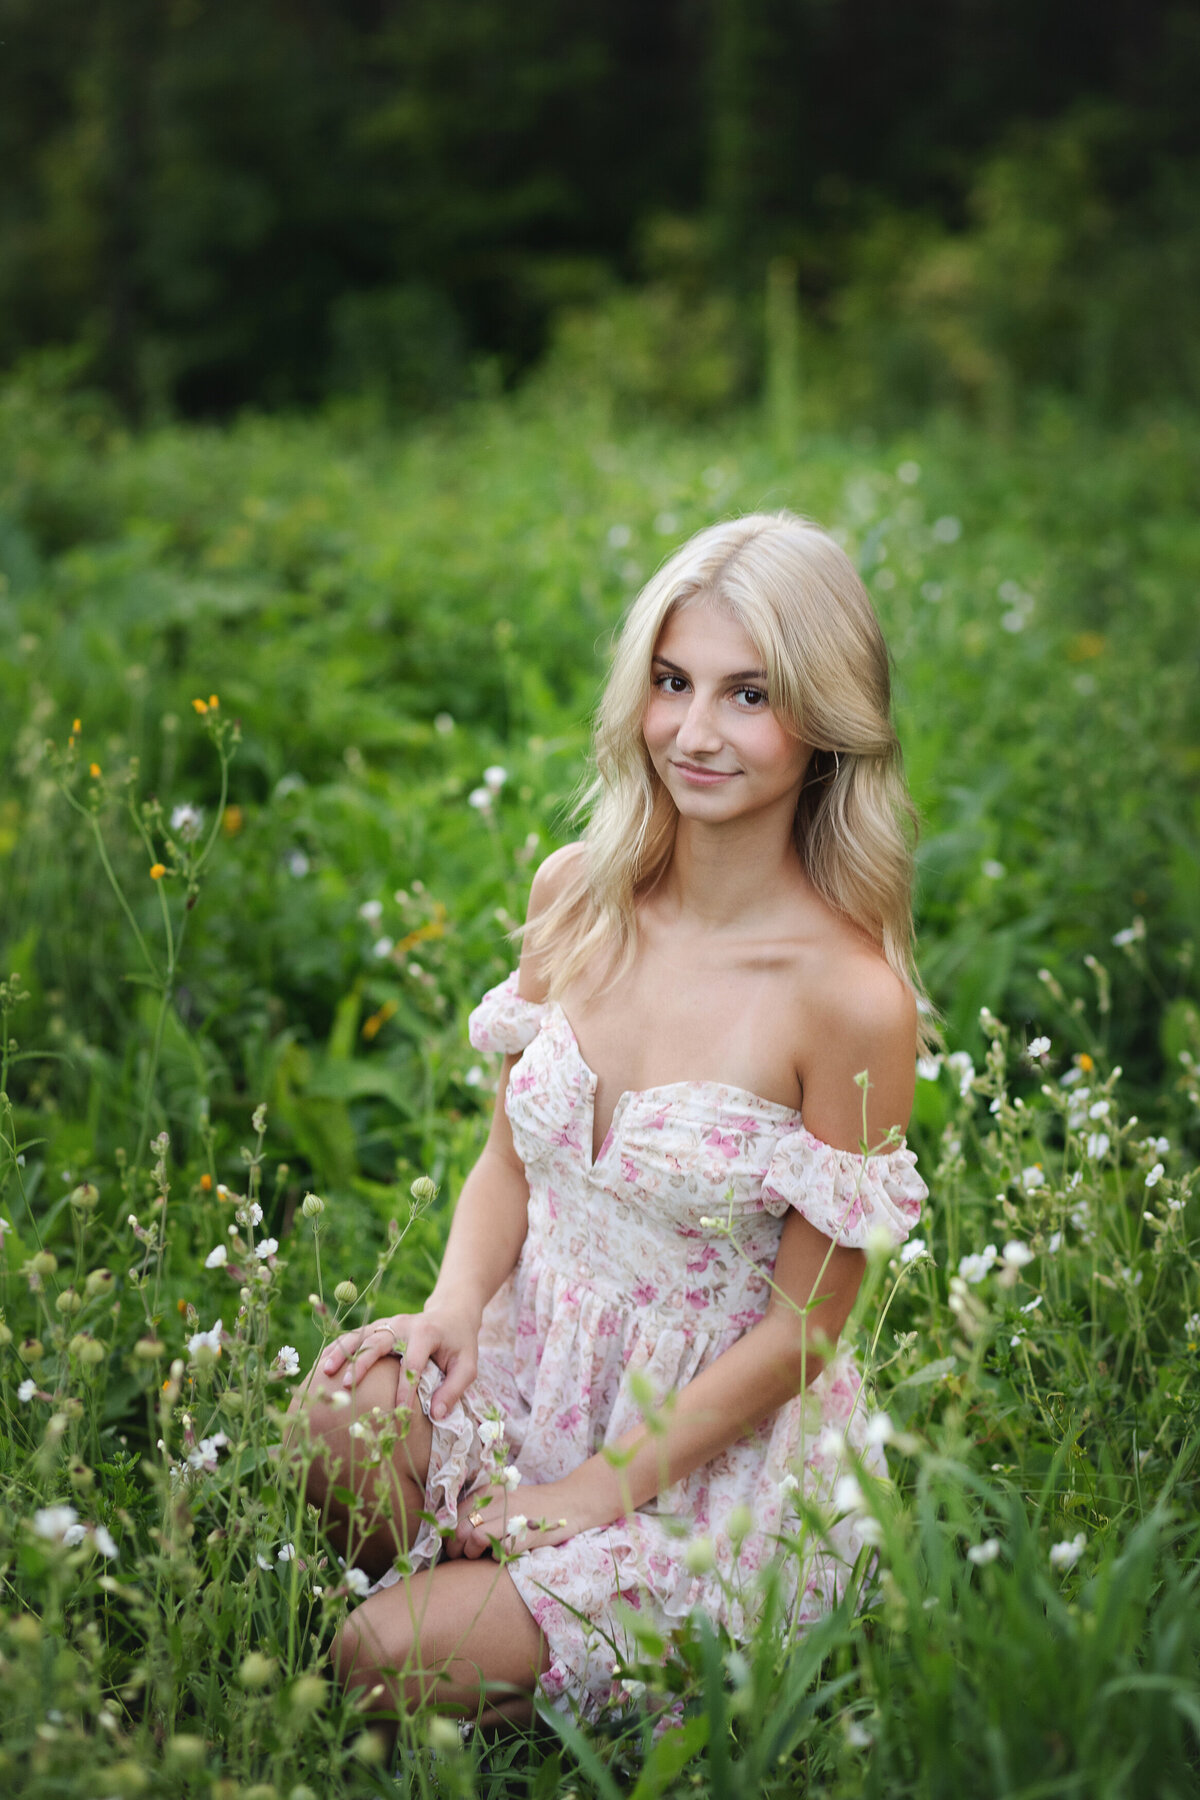 senior girl in field of grass and white flowers